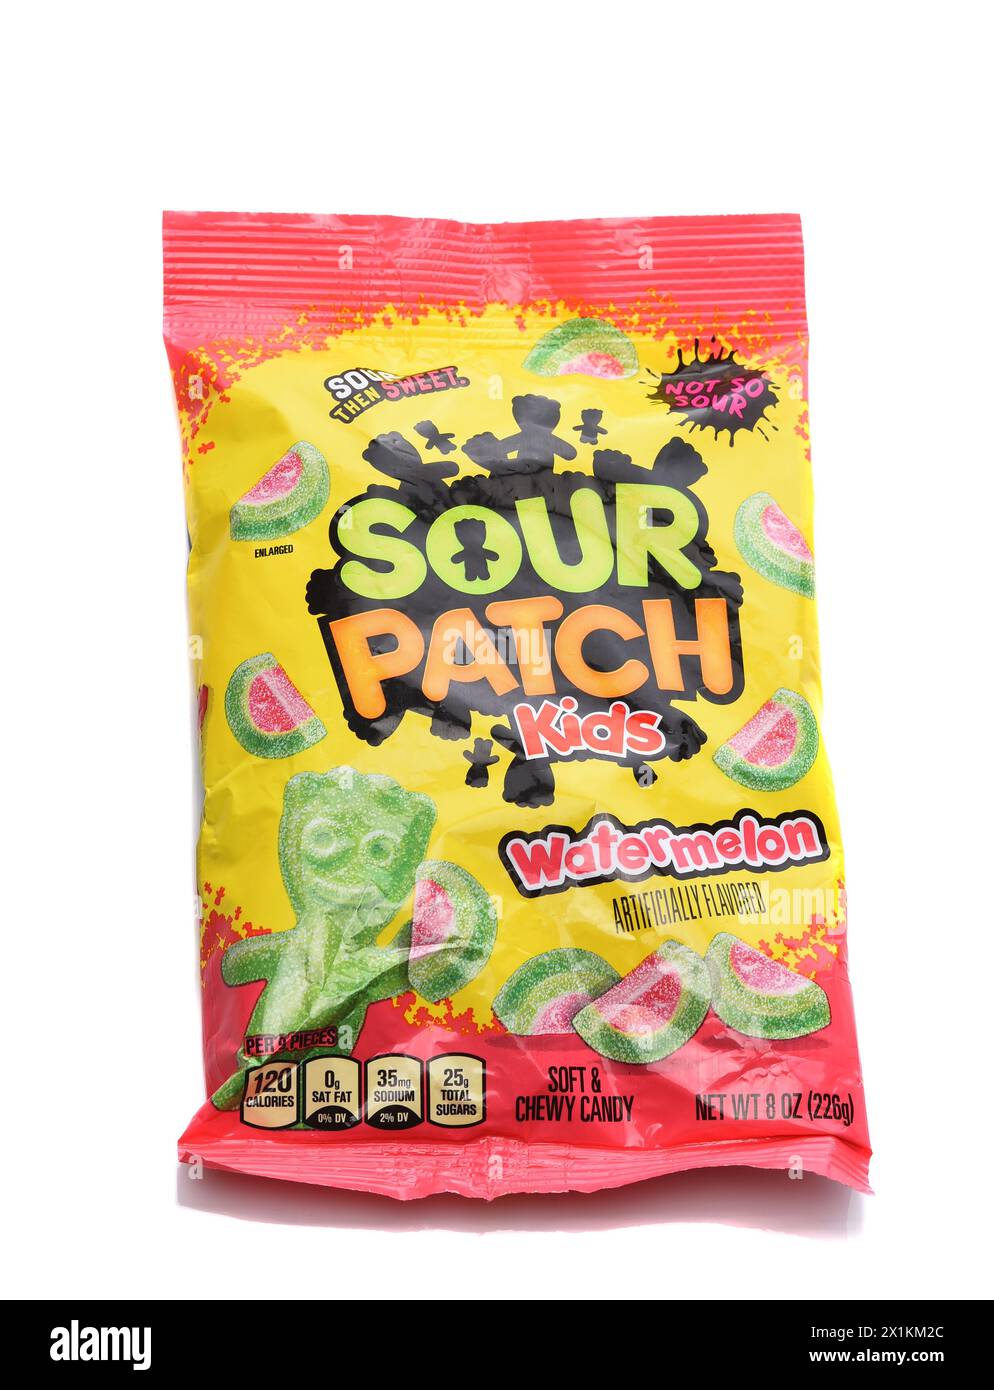 IRIVNE, CALIFORNIA - 1 APR 2024: A package of Sour Patch Kids Watermelon flavor candy. Stock Photo